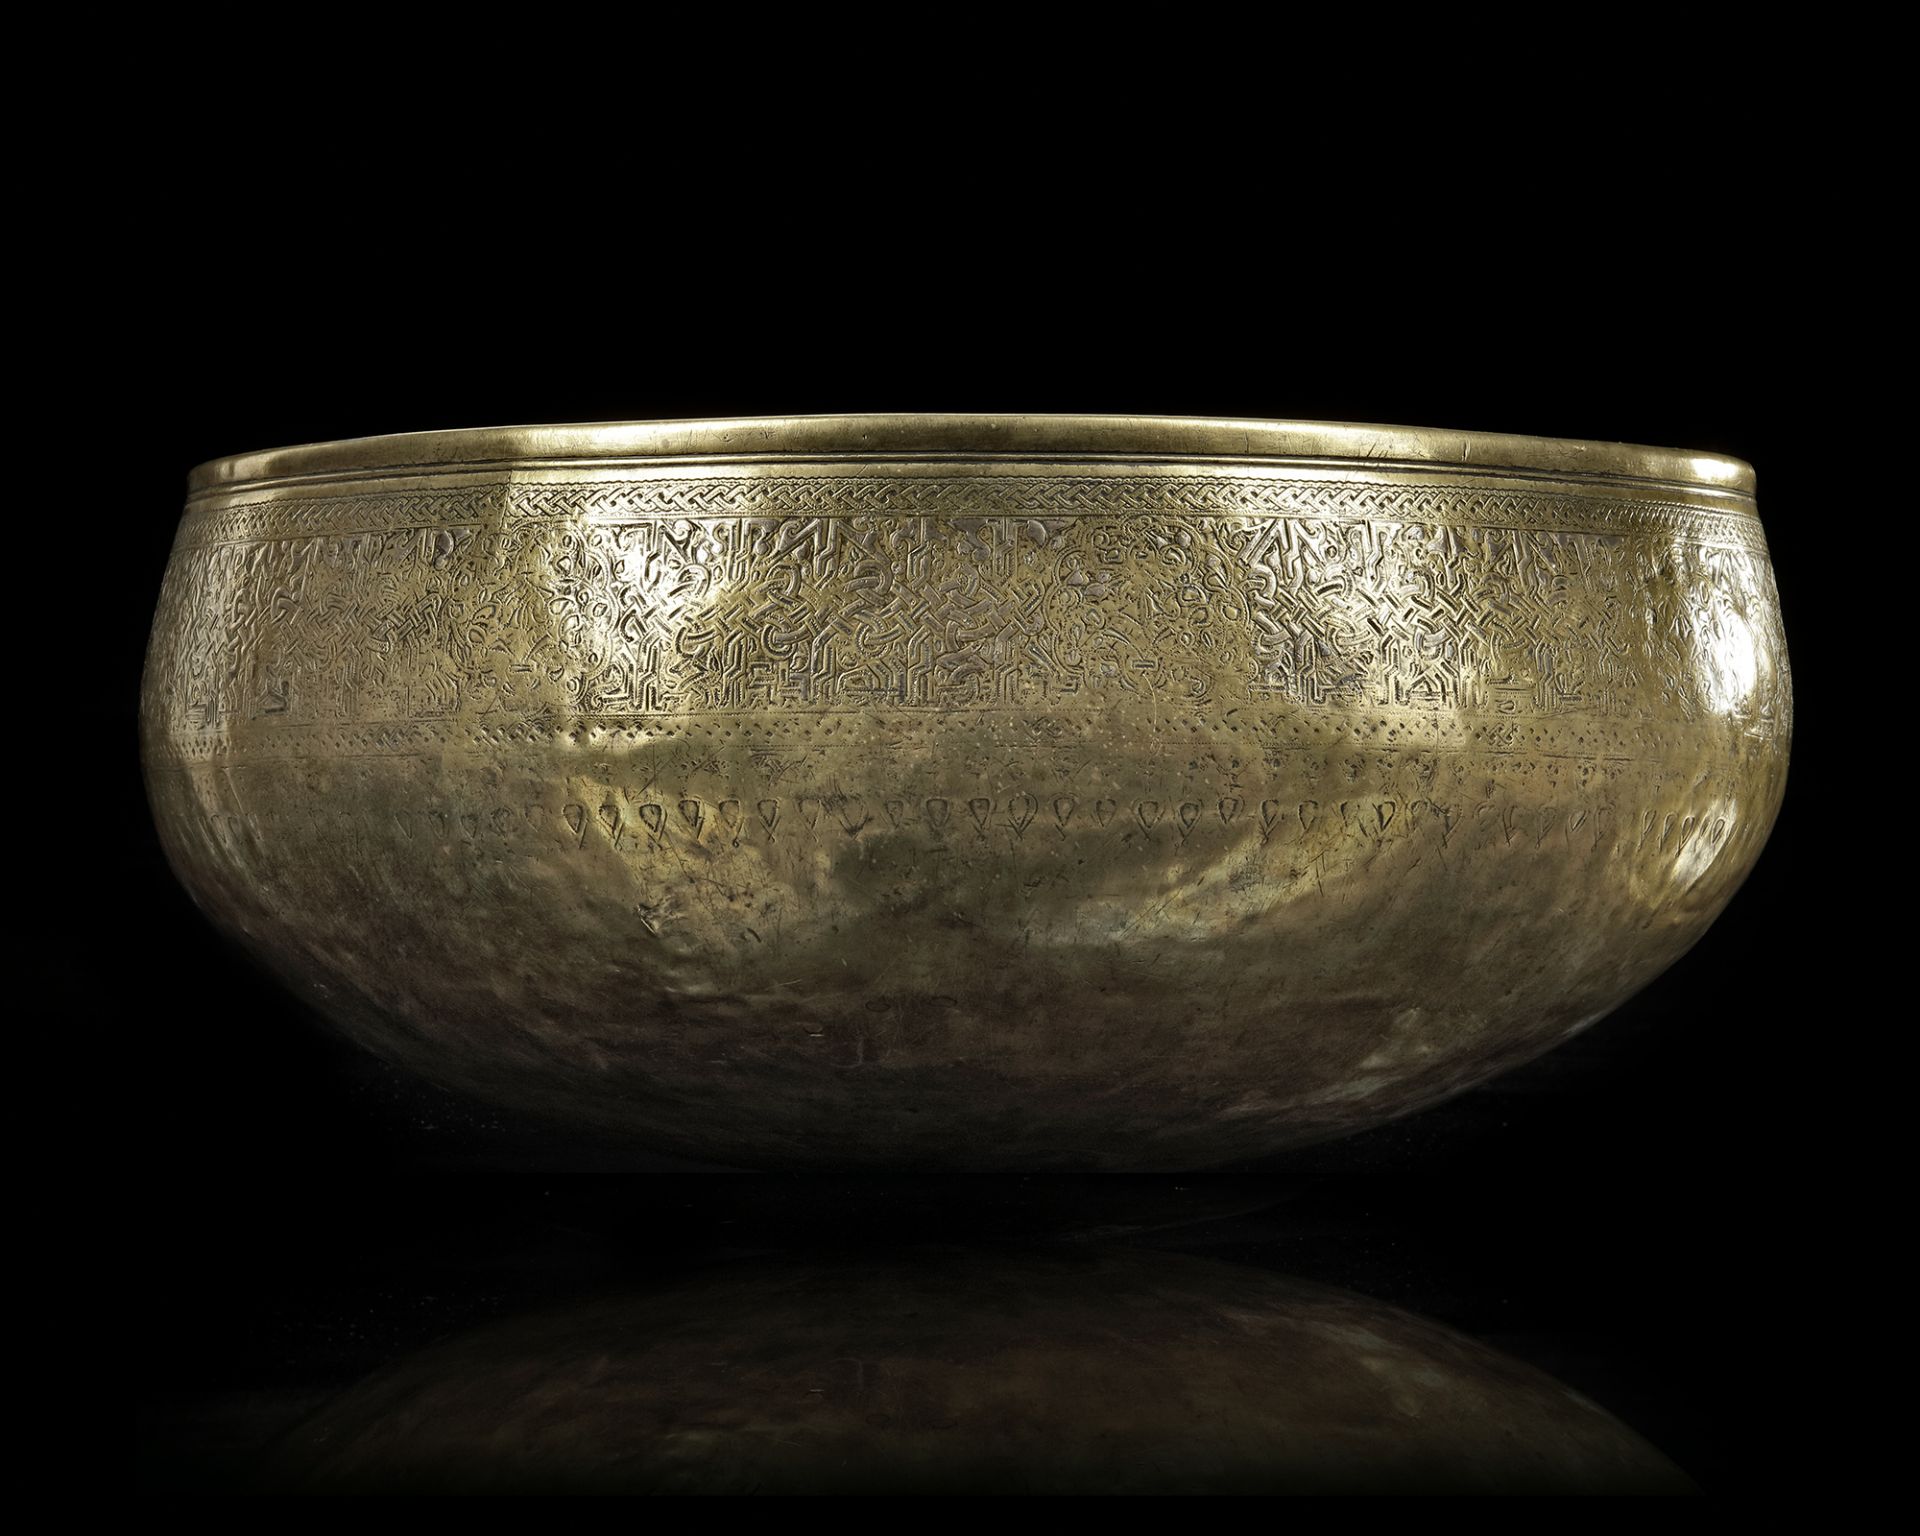 A SILVER INLAID BRASS BOWL, 14TH CENTURY - Image 6 of 10